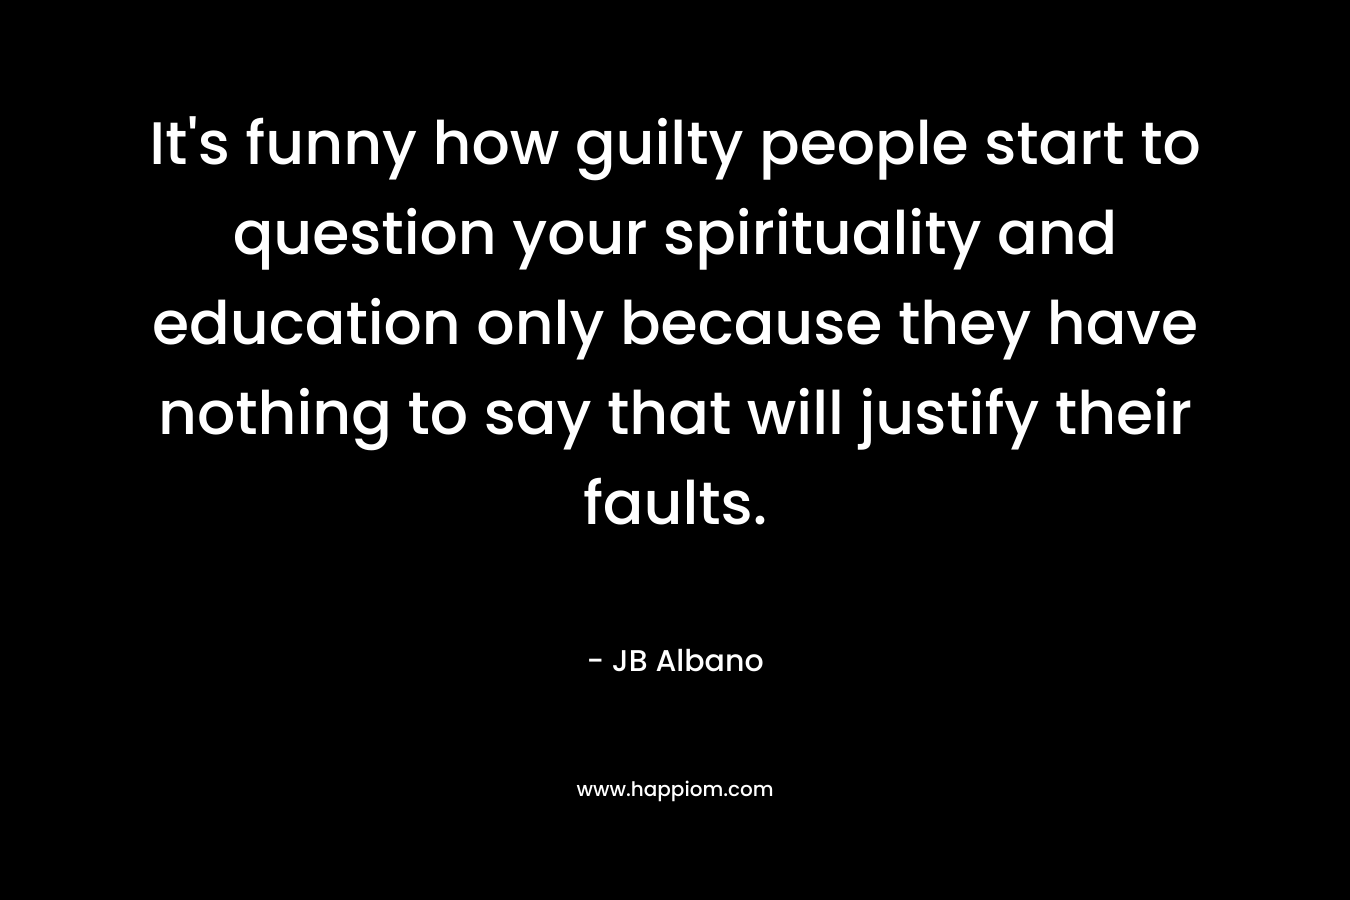 It’s funny how guilty people start to question your spirituality and education only because they have nothing to say that will justify their faults. – JB Albano